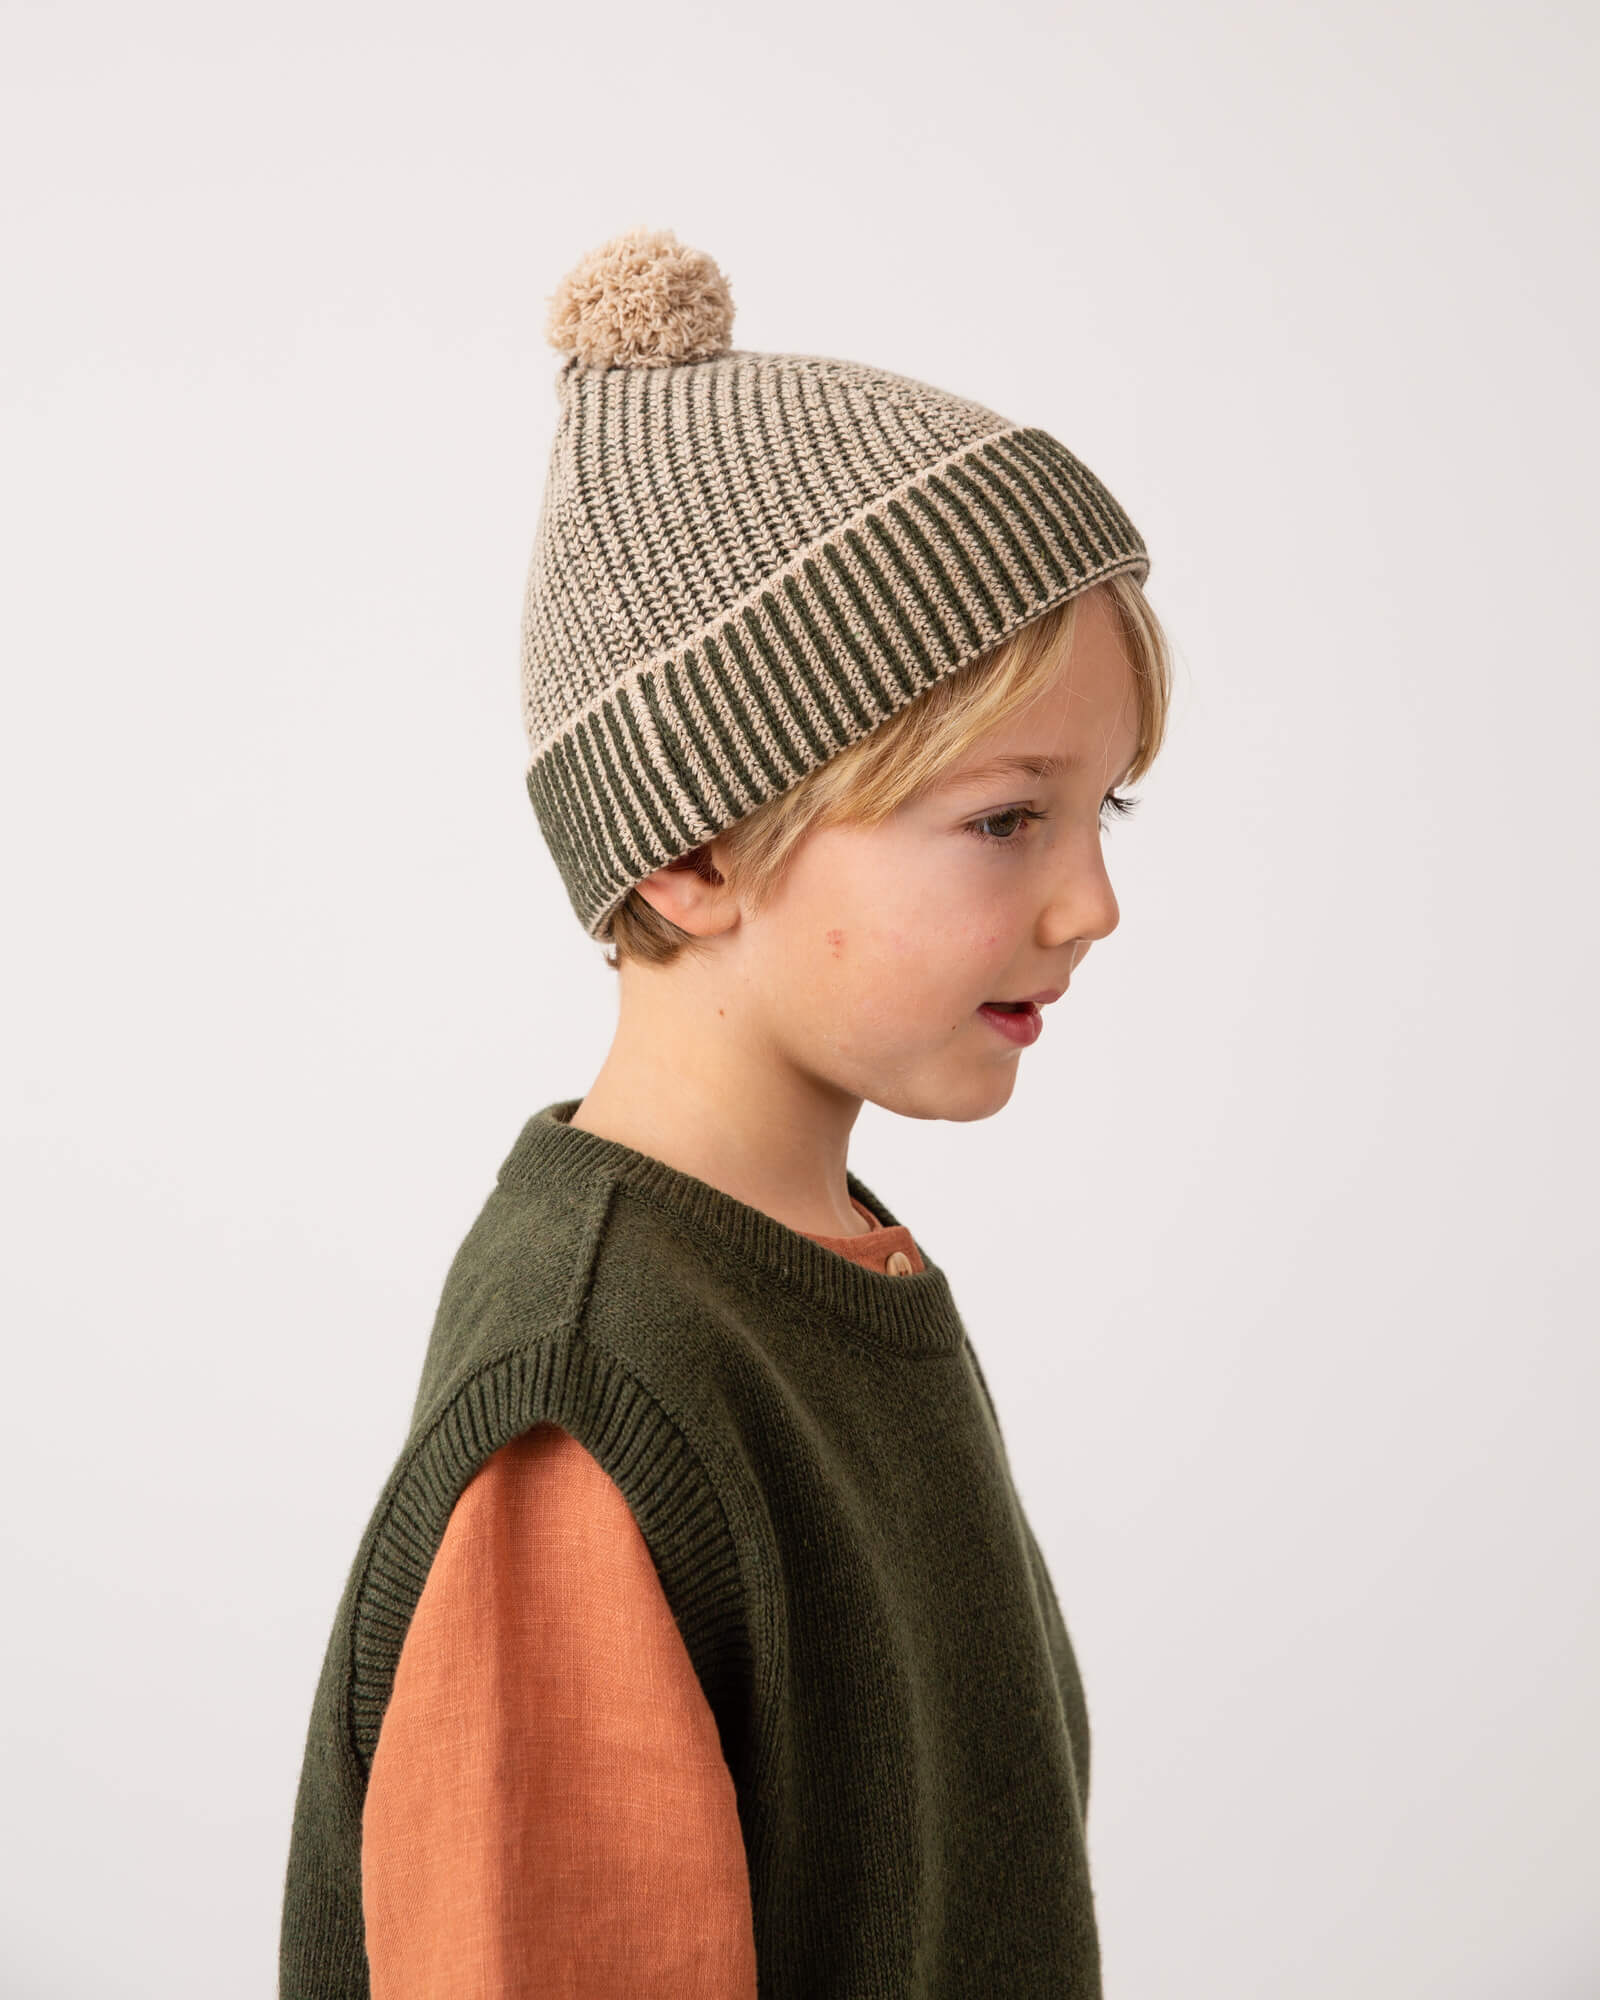 Green Pom Pom hat made from recycled wool from Matona